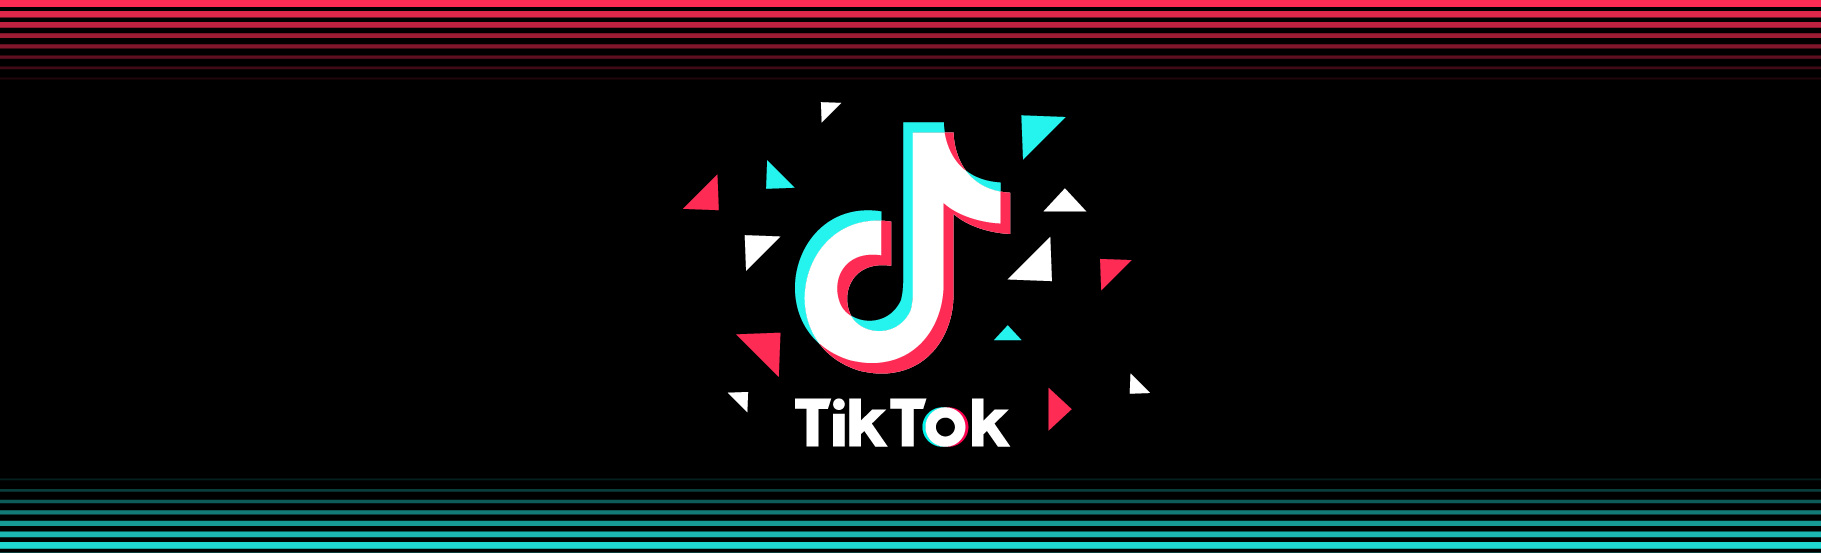 TikTok – A newly discovered territory for brands